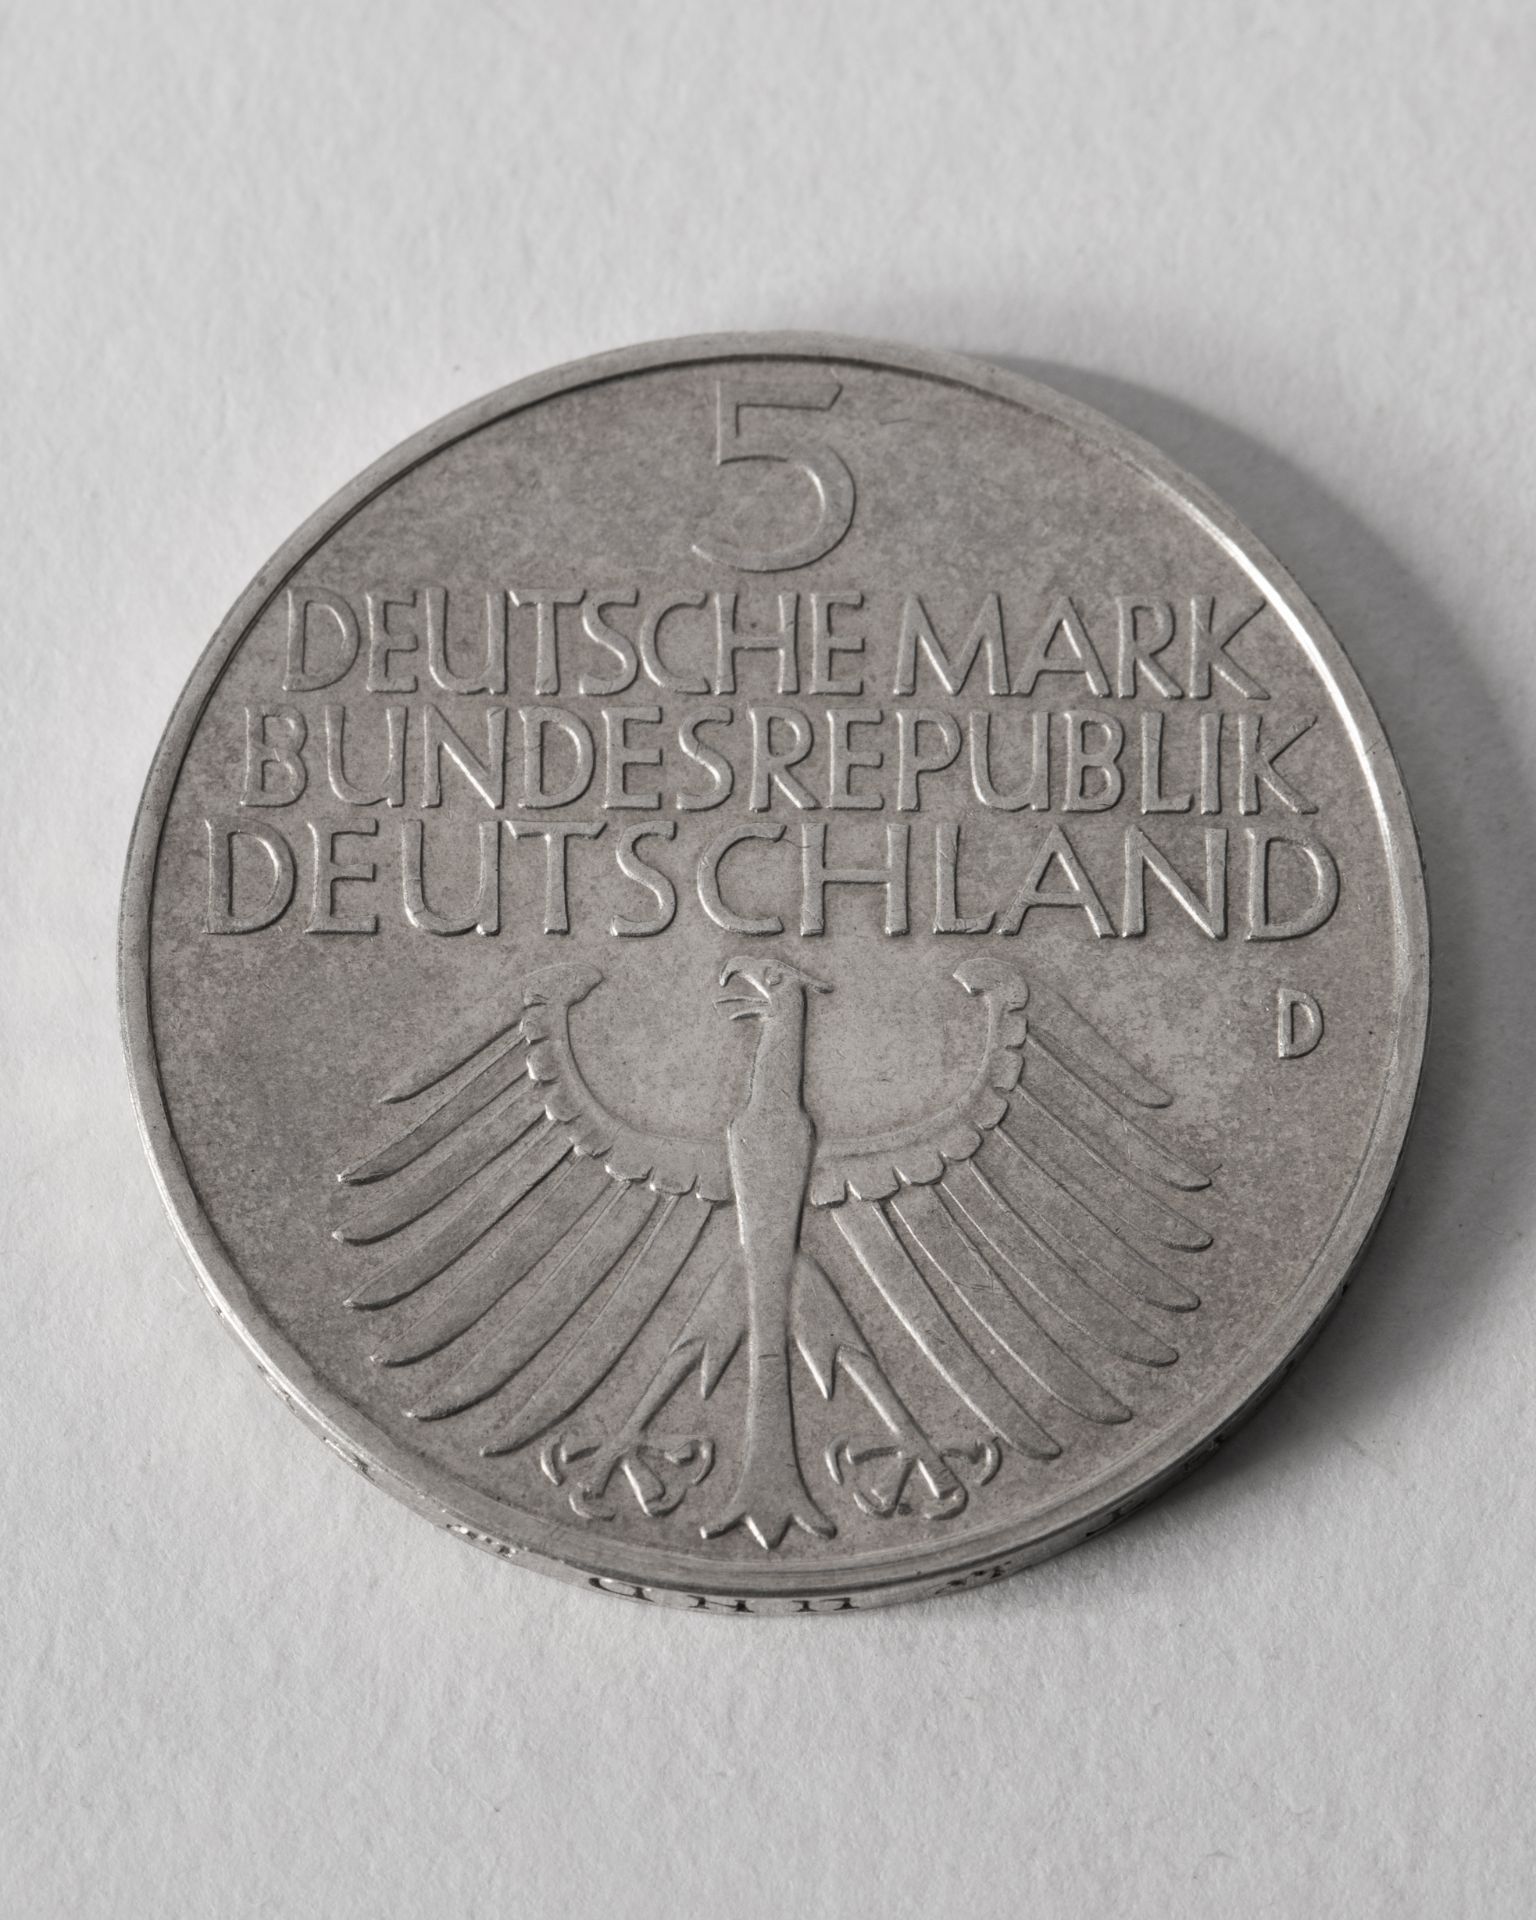 5 DM  anniversary coin 1952 D - Image 2 of 3